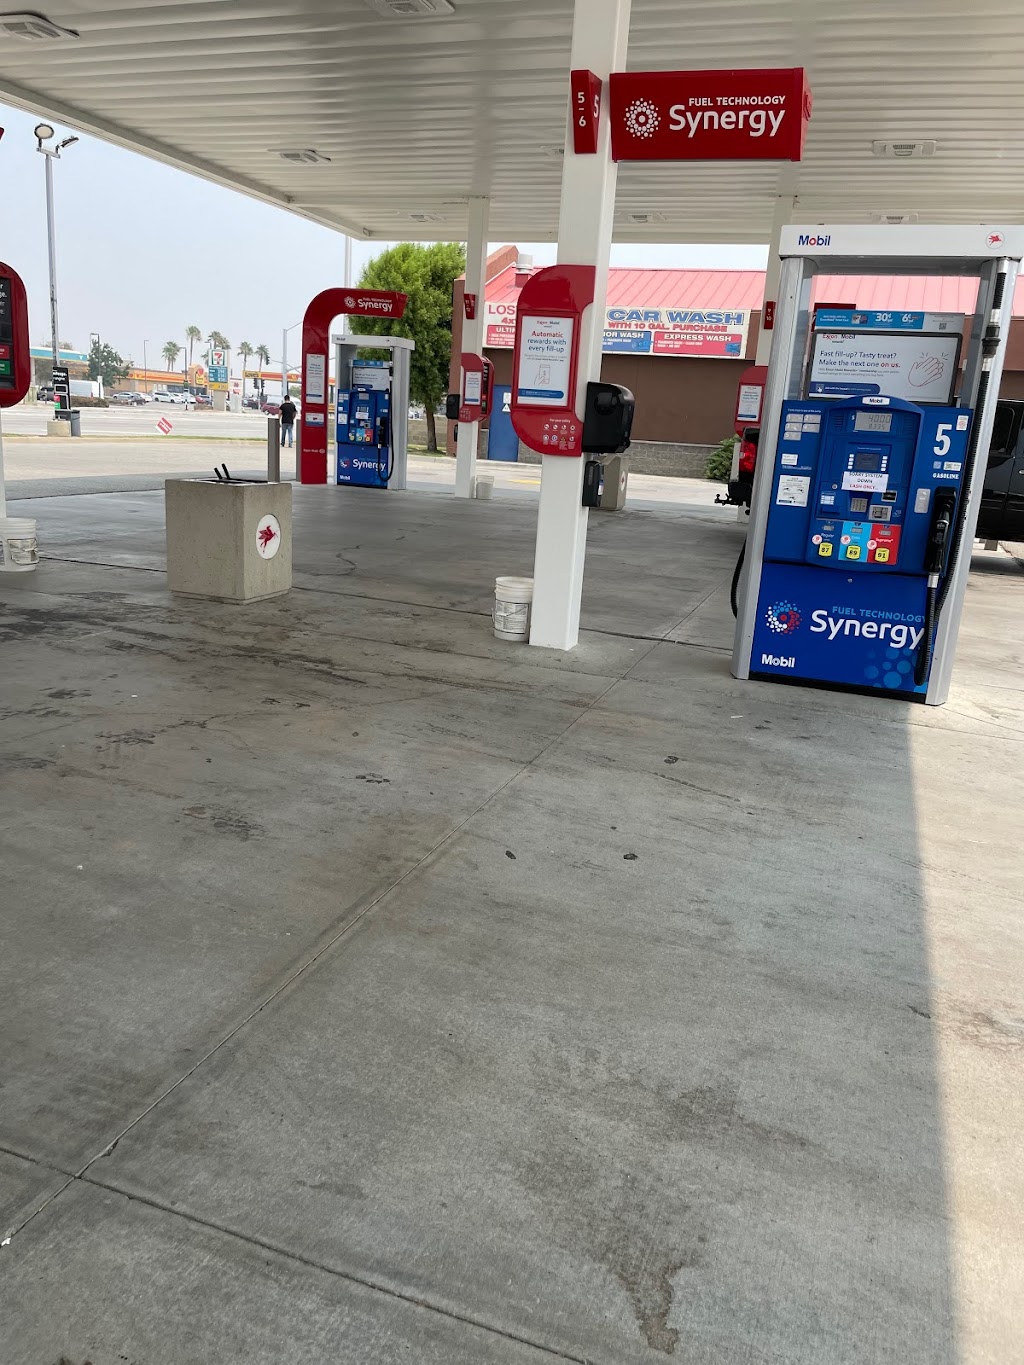 Lost Hills Mobil Gas Station | 14804 Powers St, Lost Hills, CA 93249, USA | Phone: (661) 797-2100